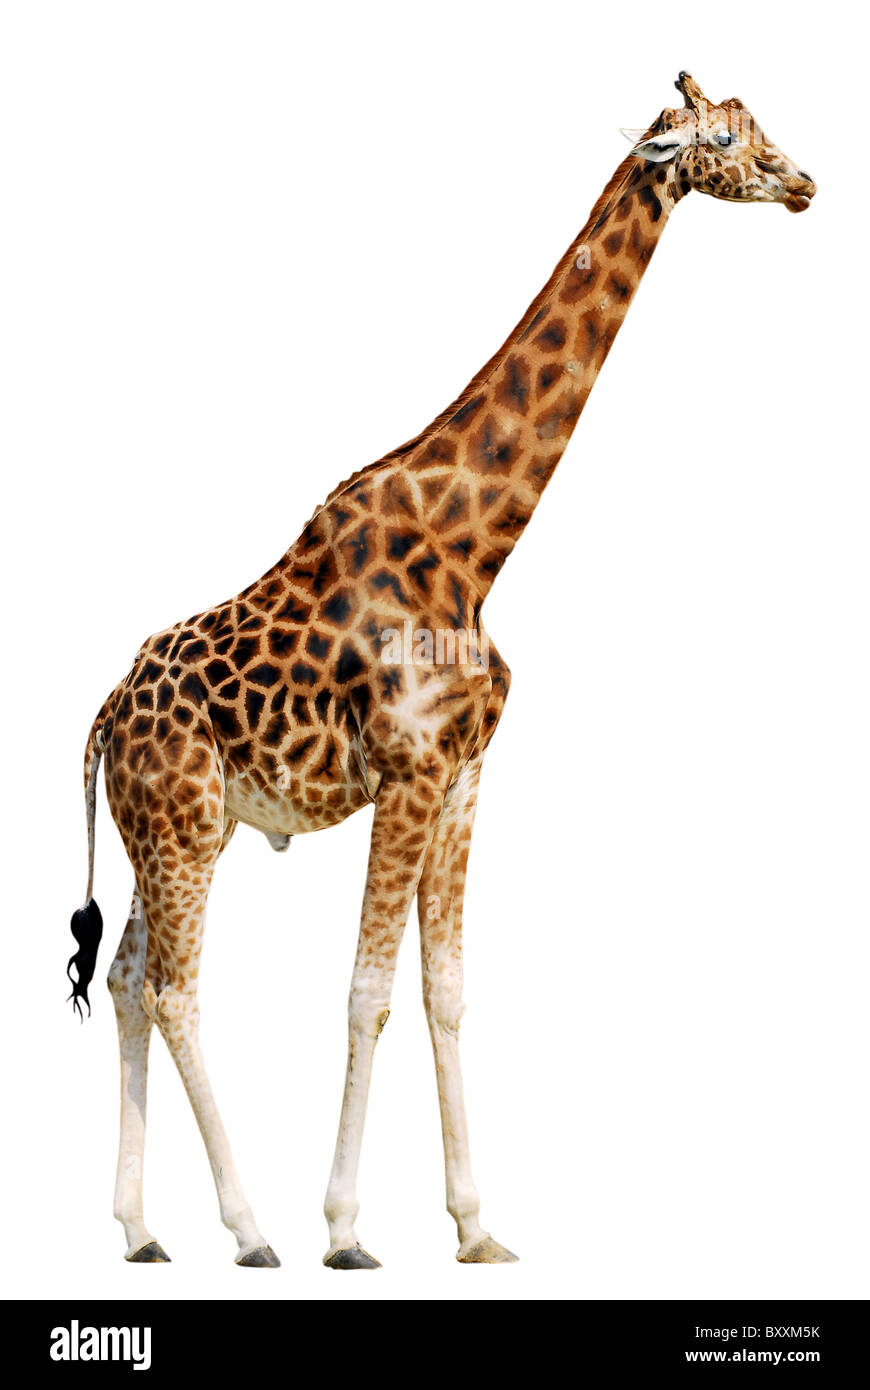 giraffe (camelopardalis) side view isolated on white background Stock Photo